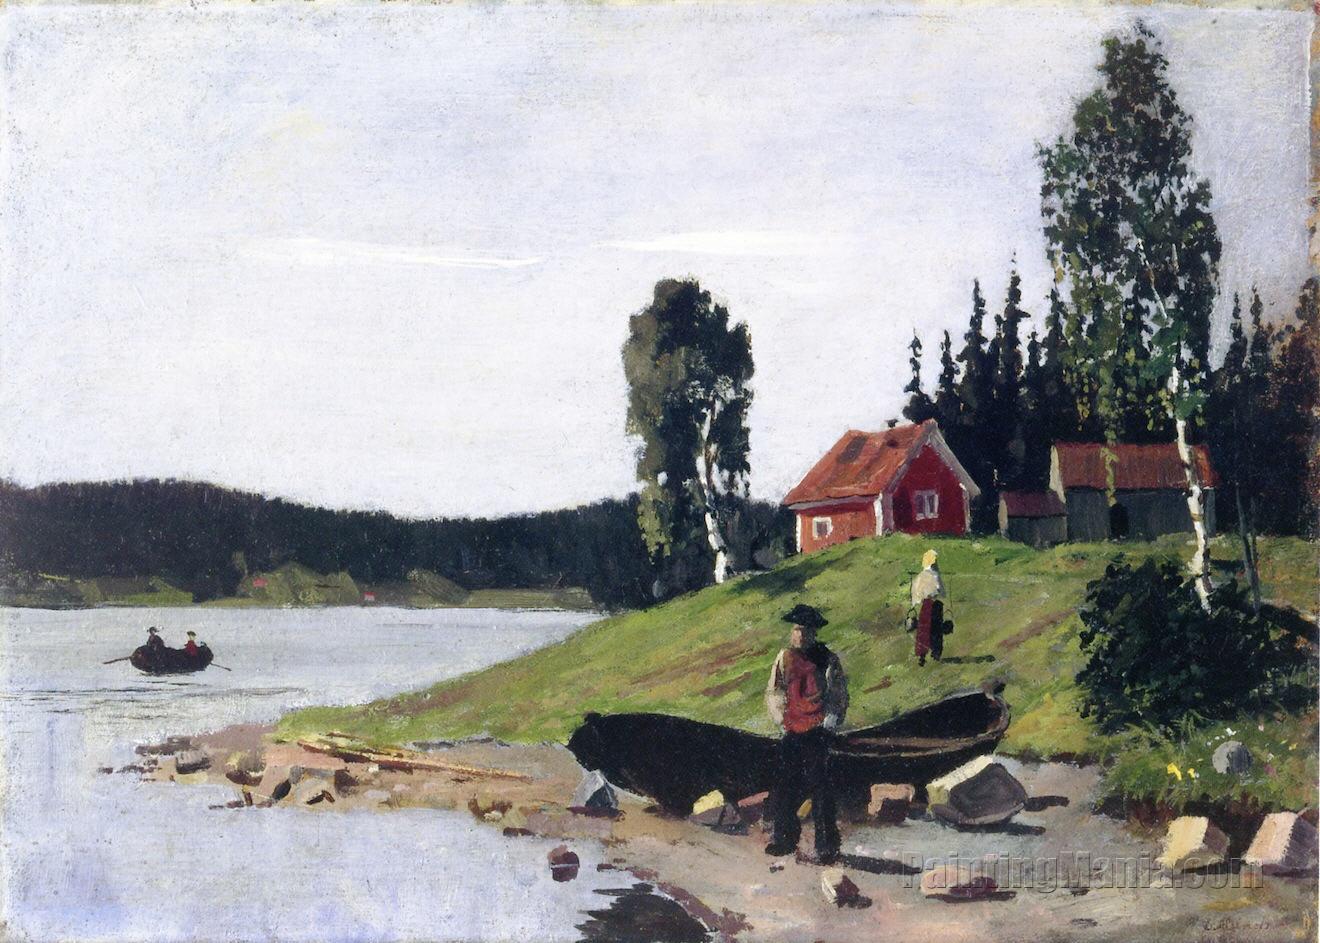 Bay with Boat and House